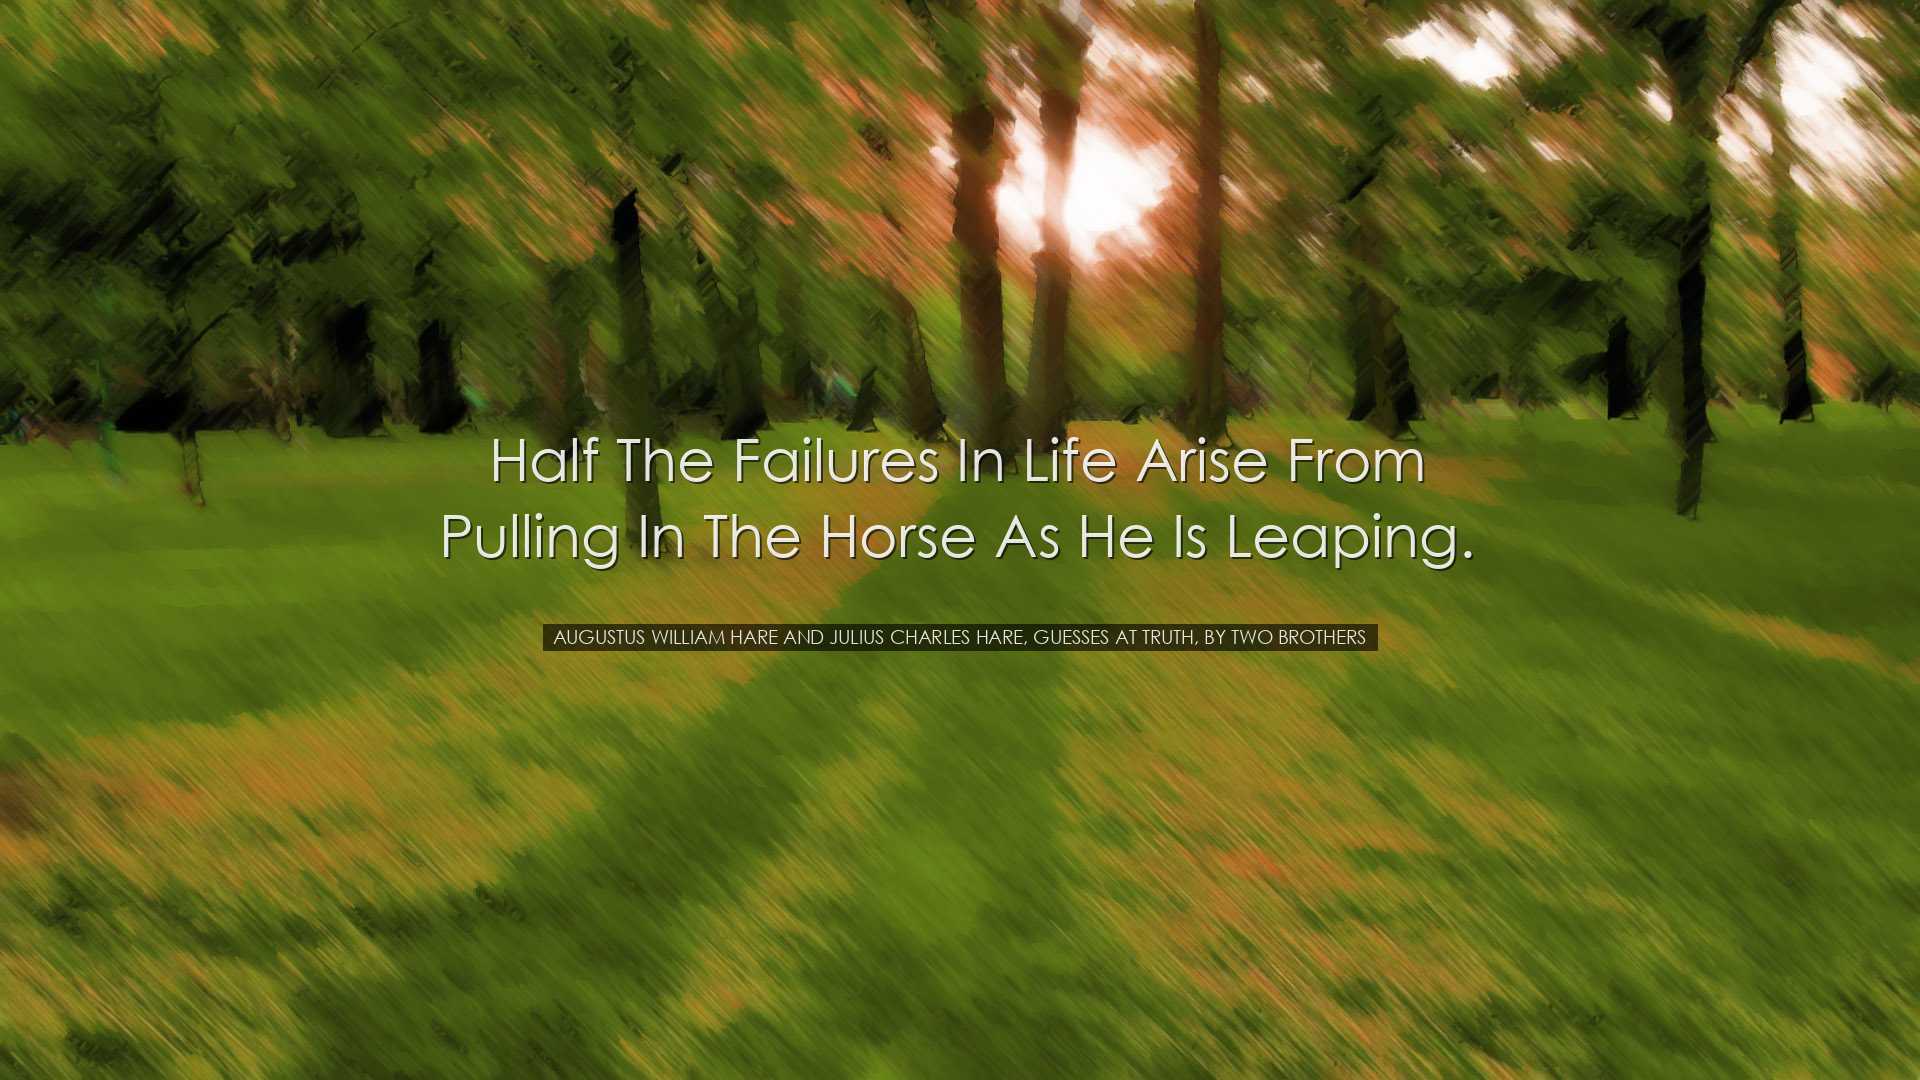 Half the failures in life arise from pulling in the horse as he is